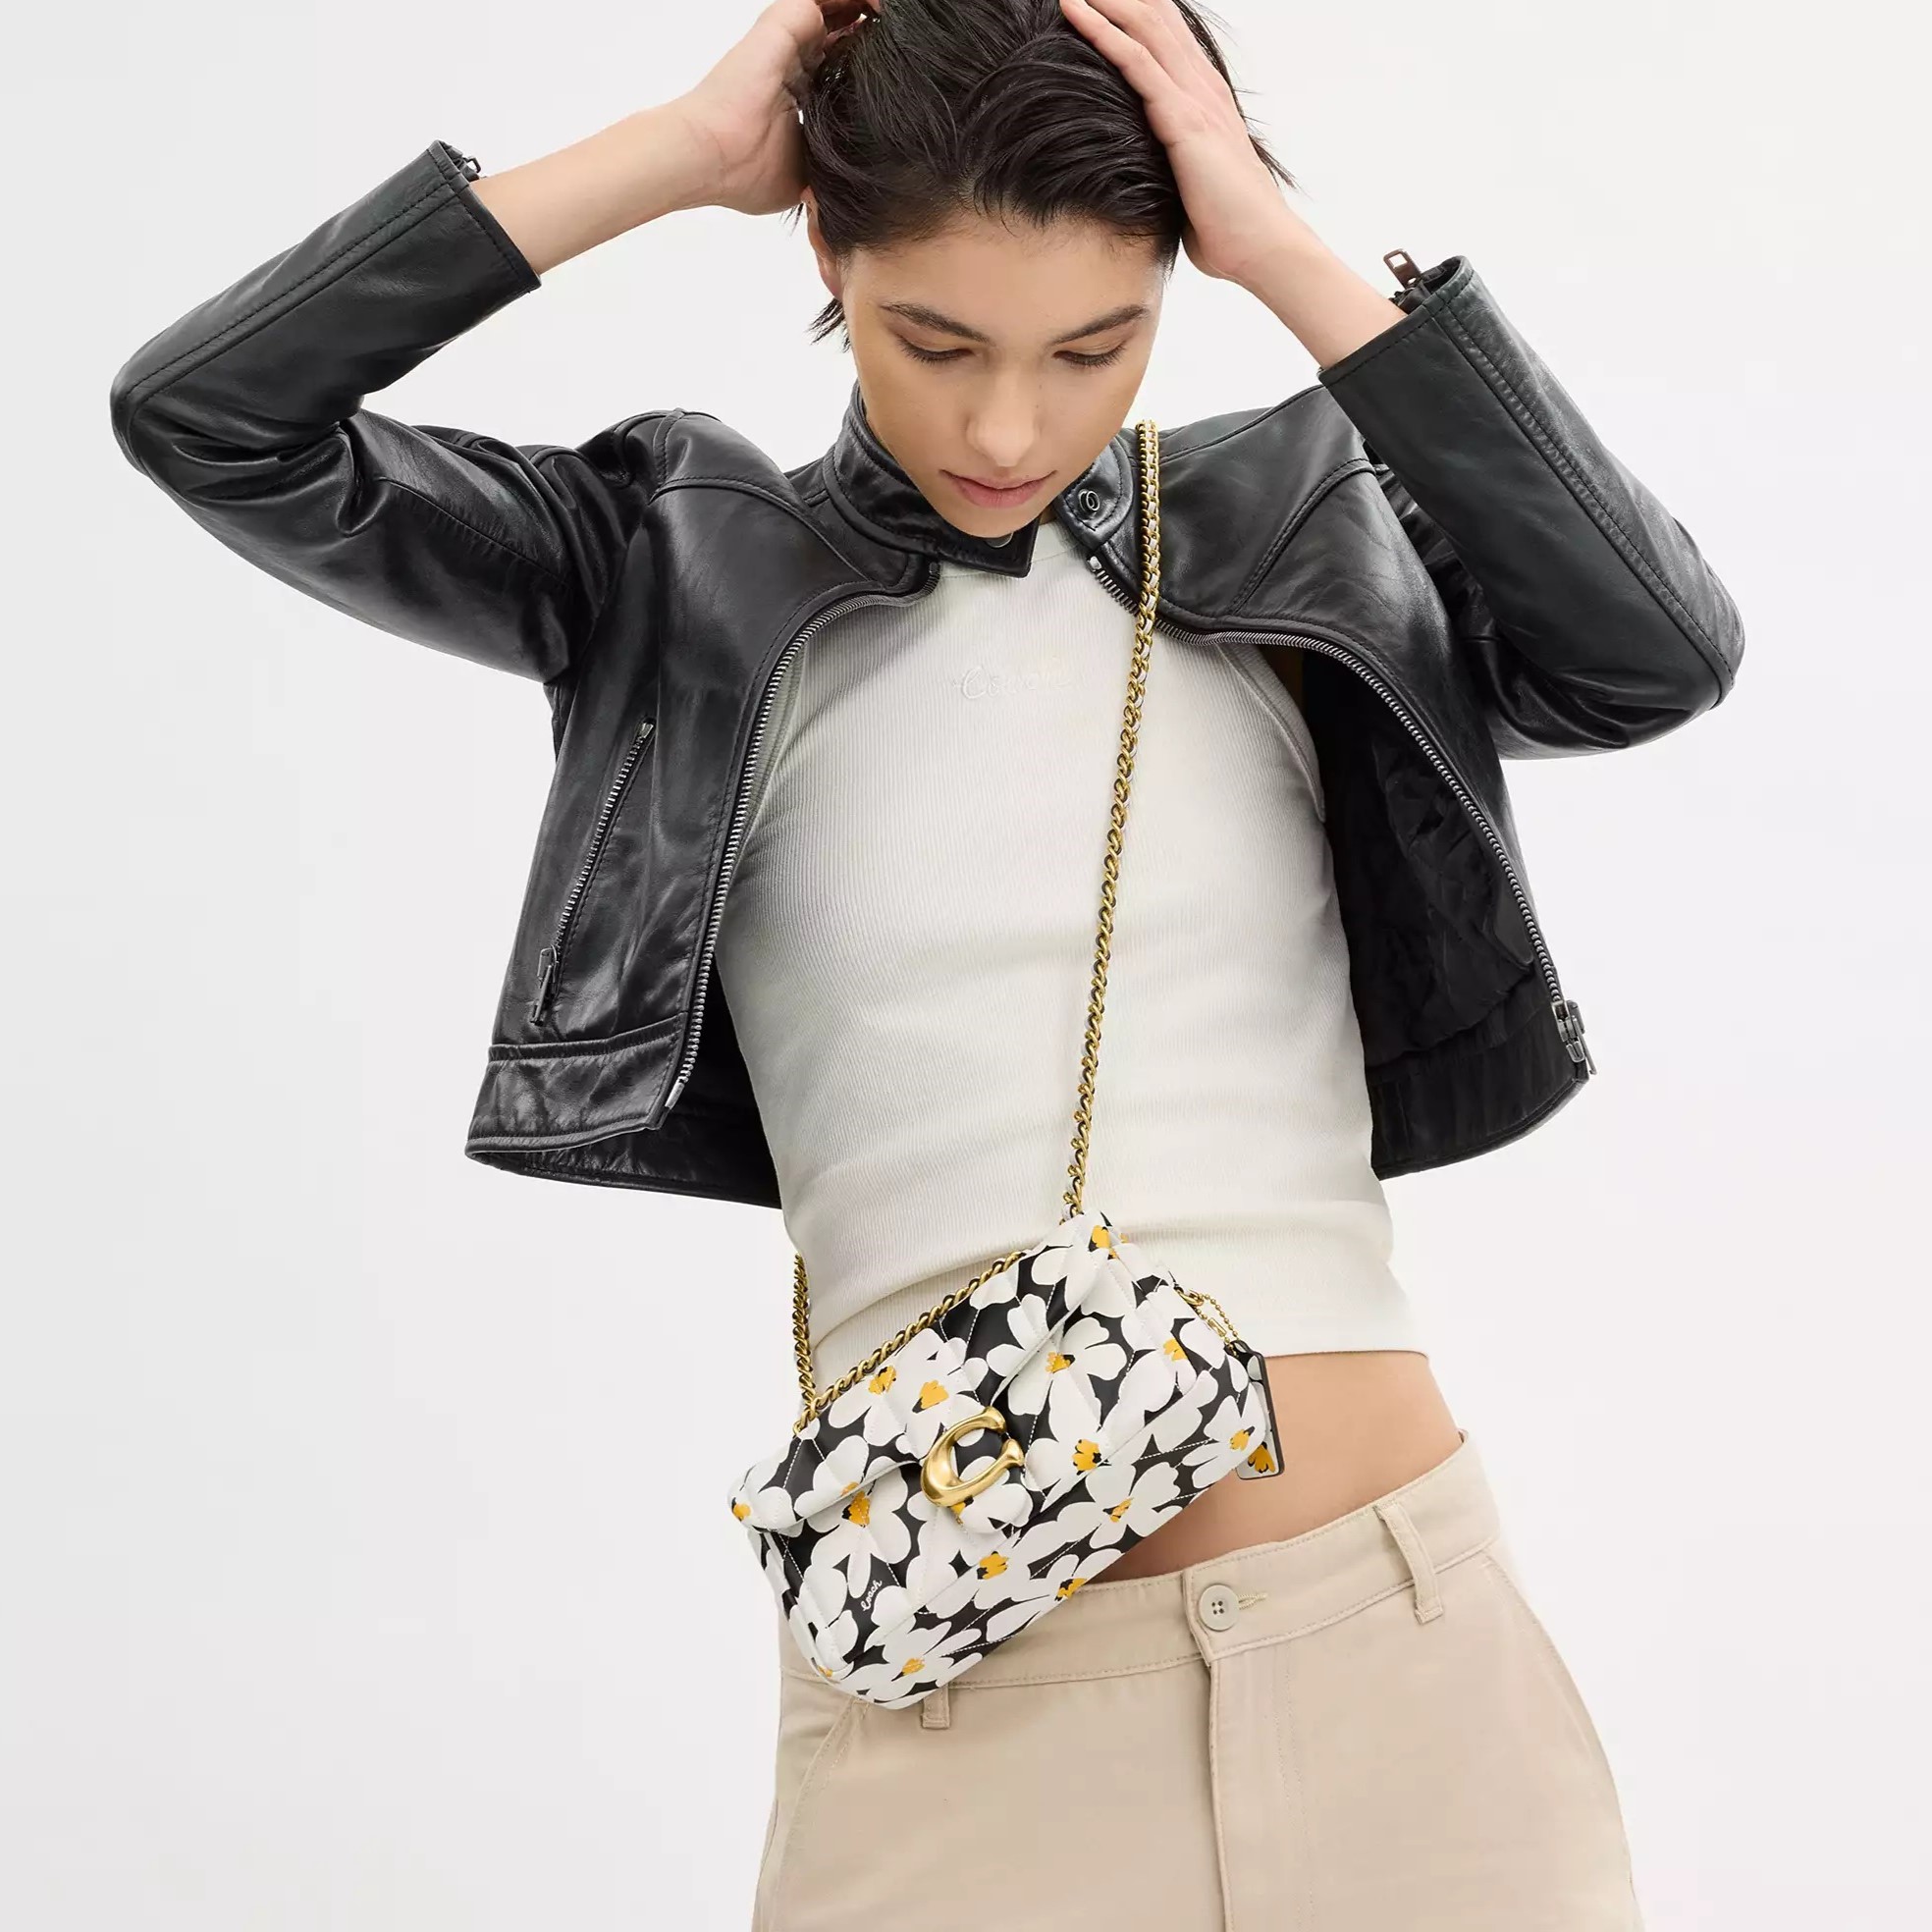 TÚI ĐEO VAI COACH TABBY SHOULDER BAG 20 WITH QUILTING AND FLORAL PRINT CR702 10